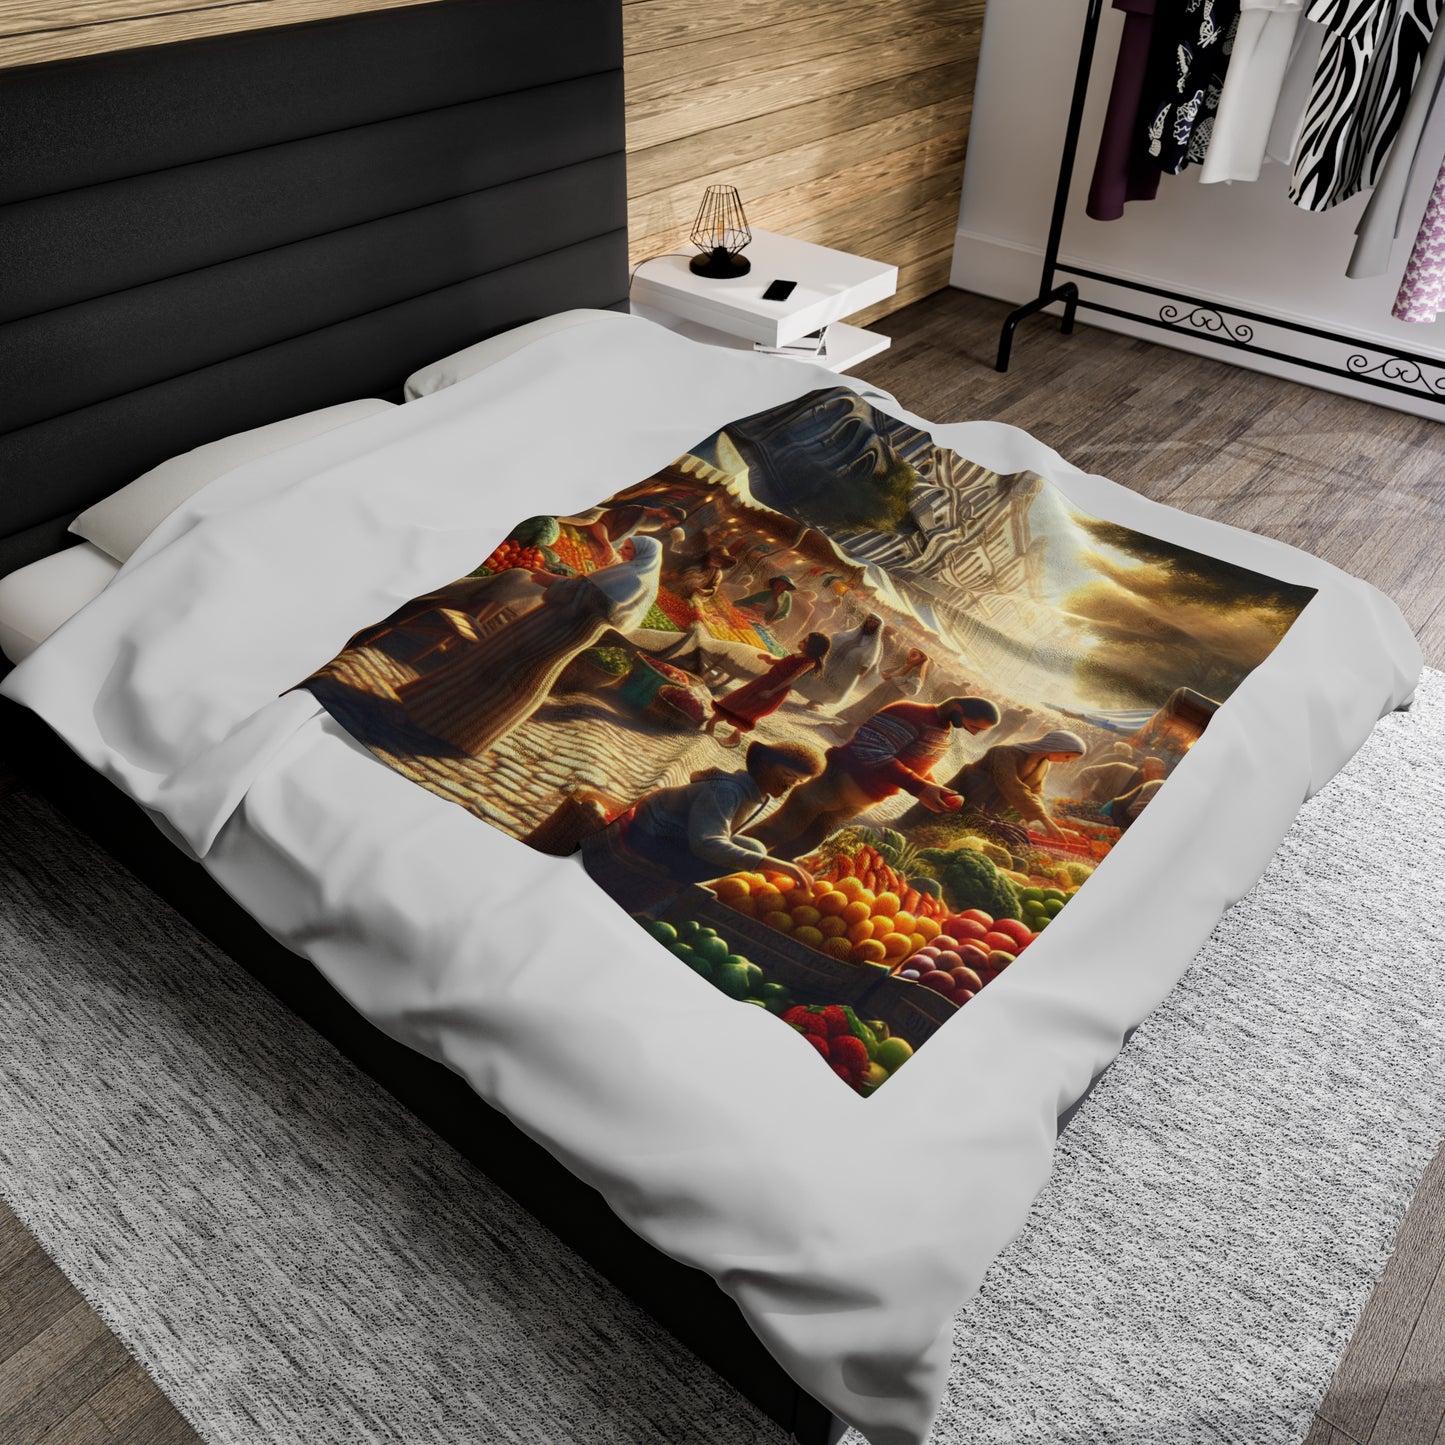 "Sunny Vibes at the Outdoor Market" - The Alien Velveteen Plush Blanket Realism Style